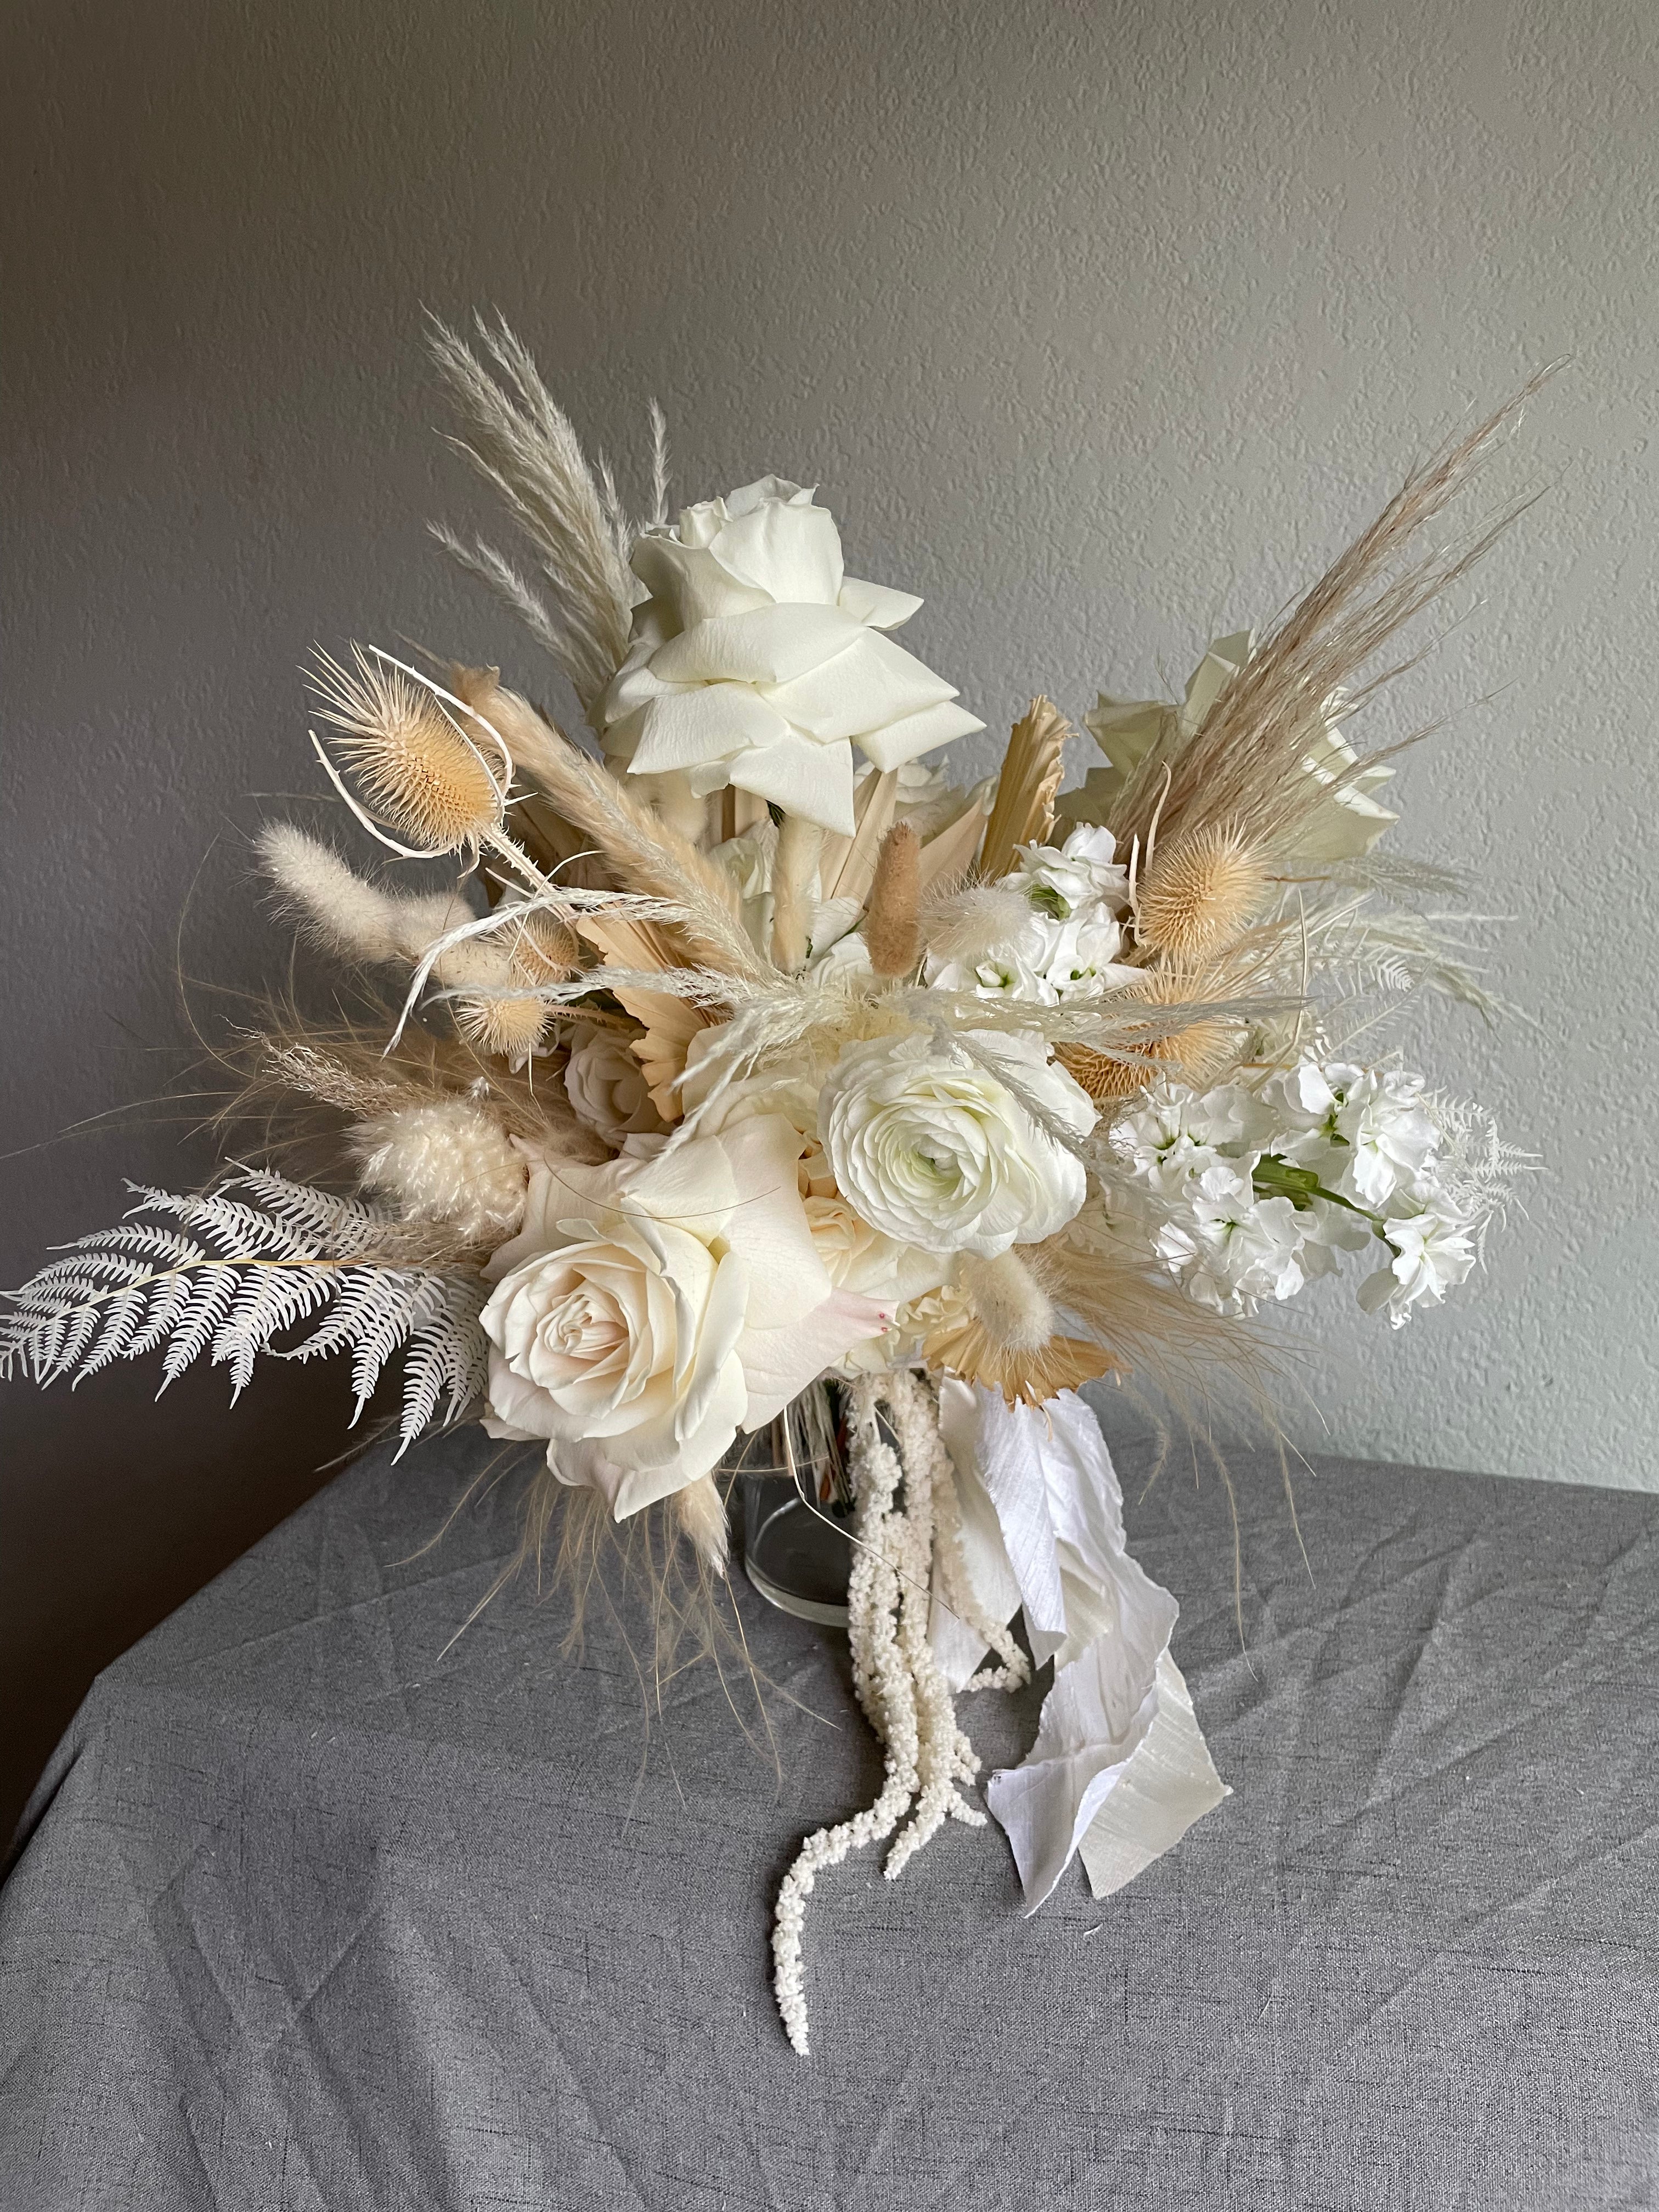 long lasting natural boho bridal bouquet arranged with fresh white and cream flowers 